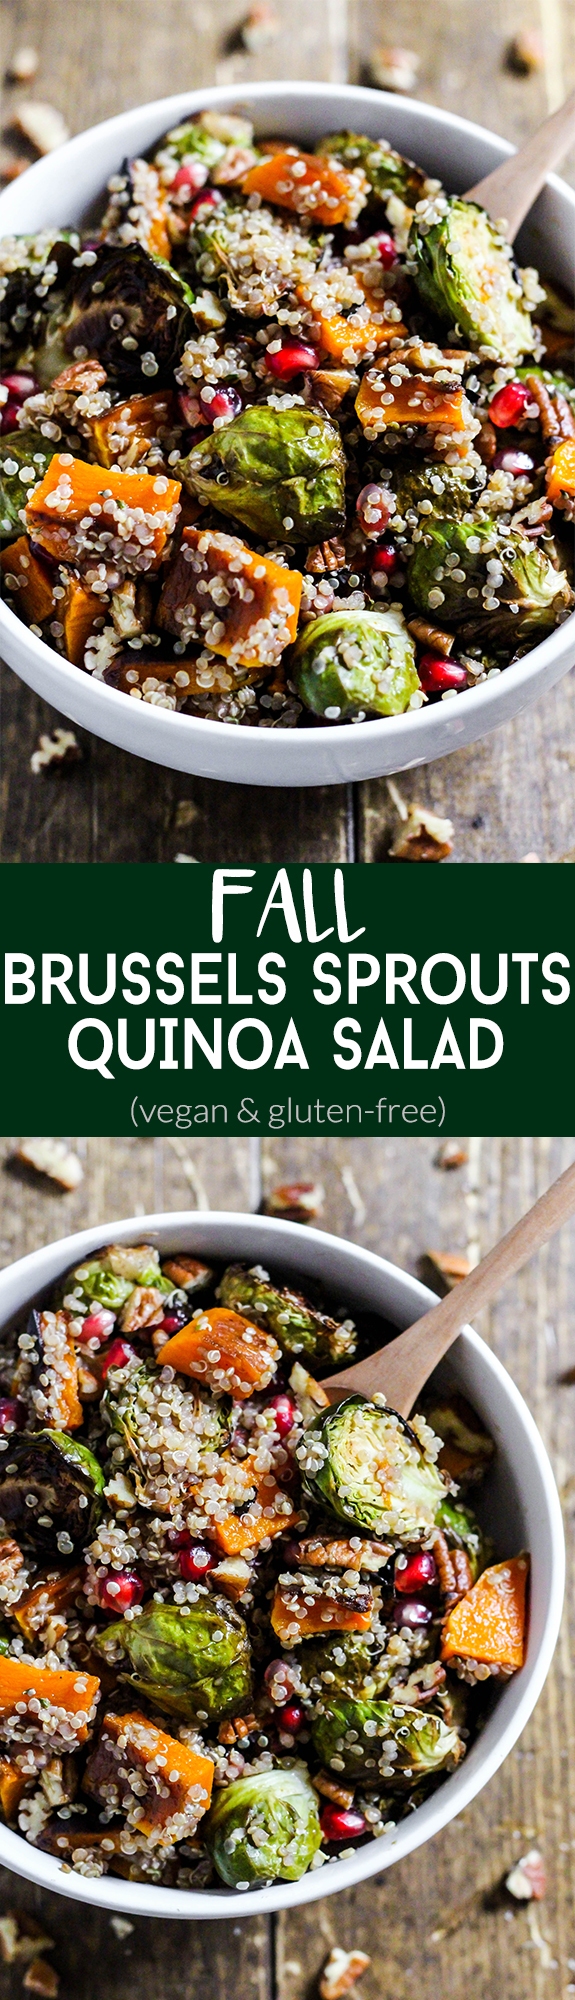 Enjoy the comforting flavors of the season in this Fall Brussels Sprouts Quinoa Salad! It's sweet and salty in a healthy side dish. (vegan & gluten-free)